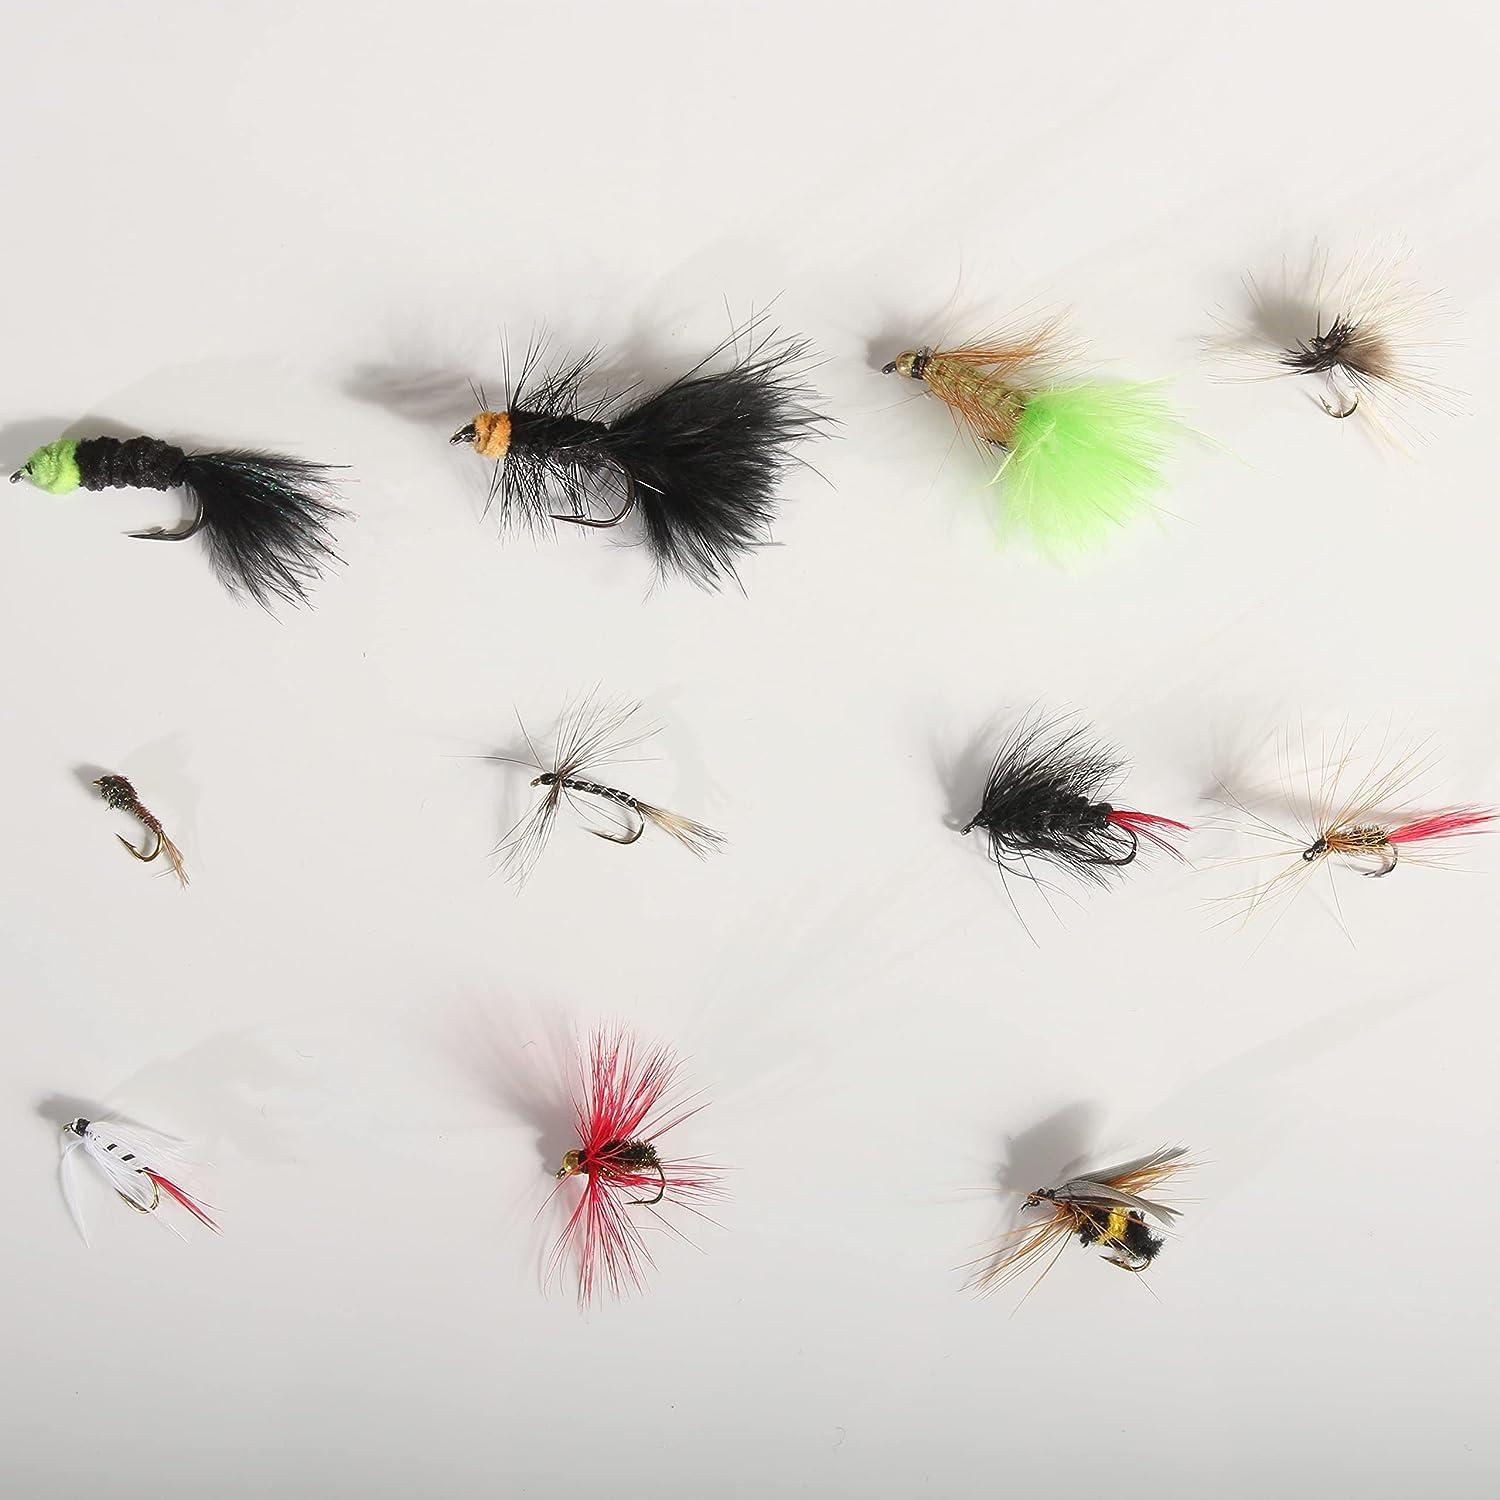 FNC 40pcs/set Dry Flies Fly Fishing Baits Kit Bass Salmon Trouts Flies  Floating Assortment with Box